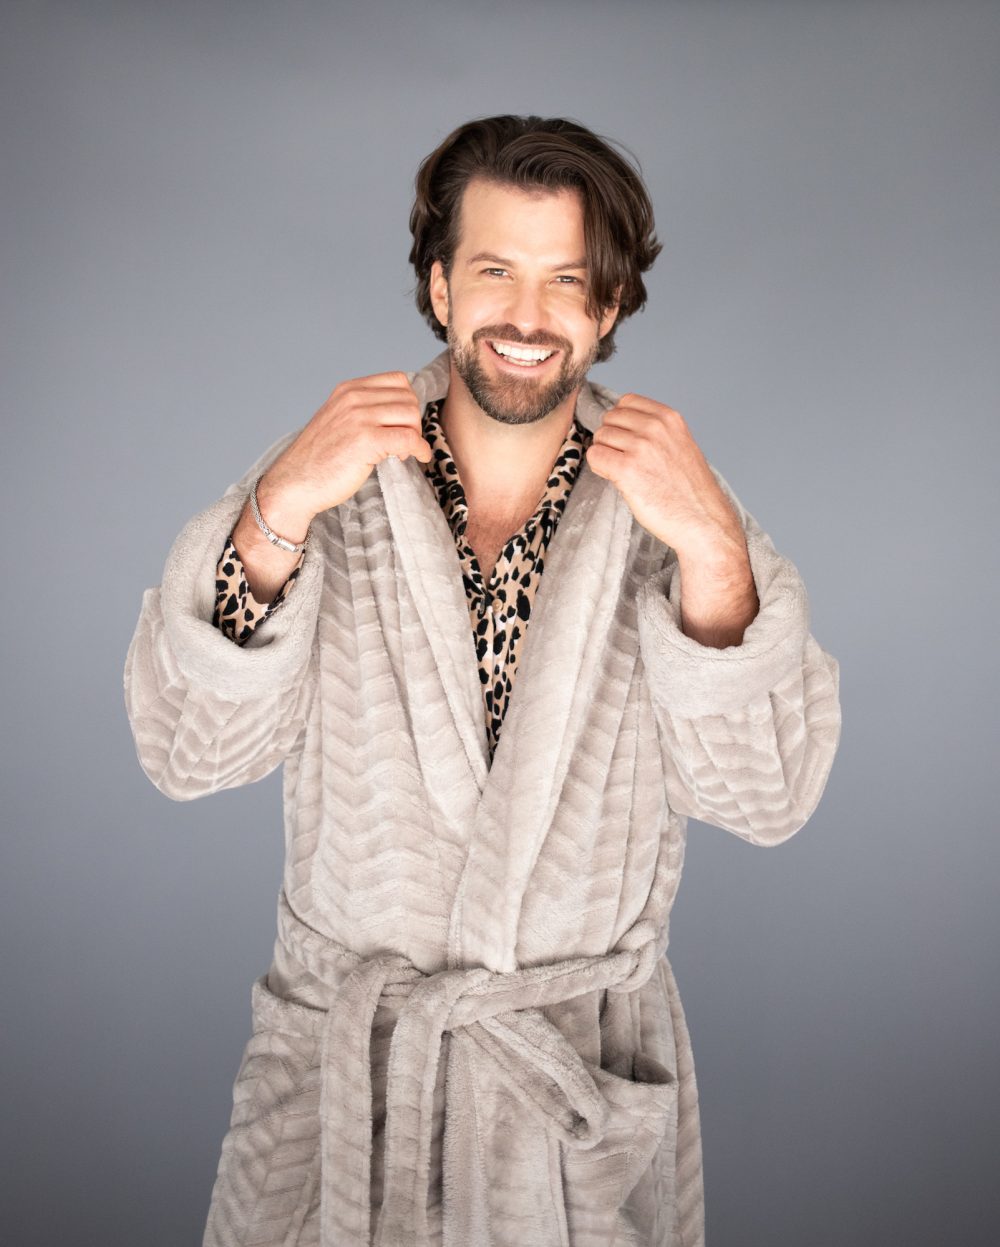 Johnny Bananas Shed The Challenge Persona for Celebrity Sleepover